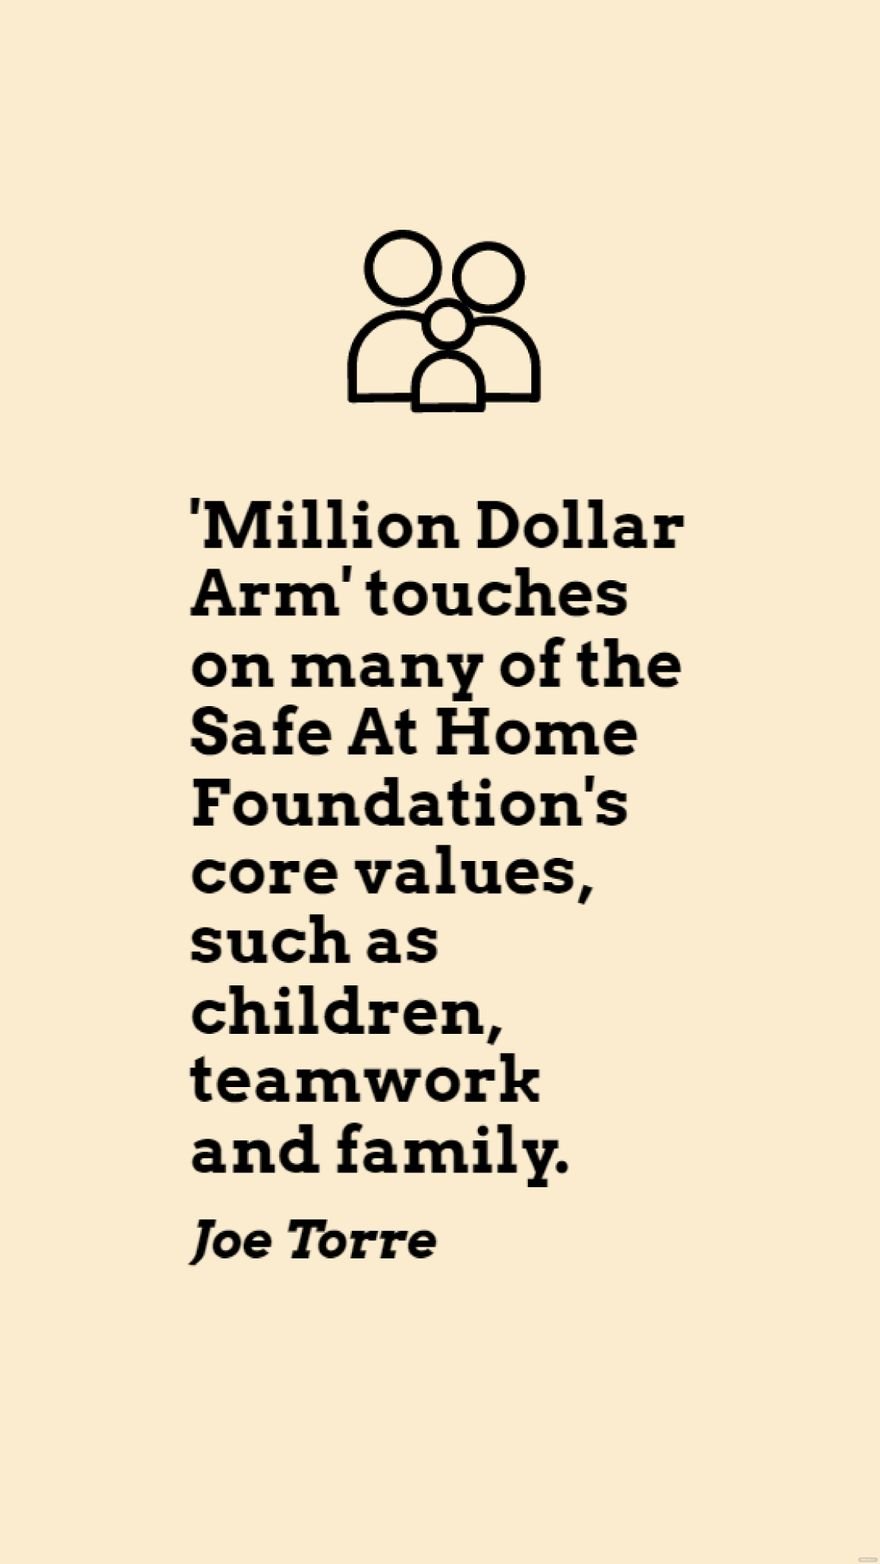 Free Joe Torre - 'Million Dollar Arm' touches on many of the Safe At Home Foundation's core values, such as children, teamwork and family.